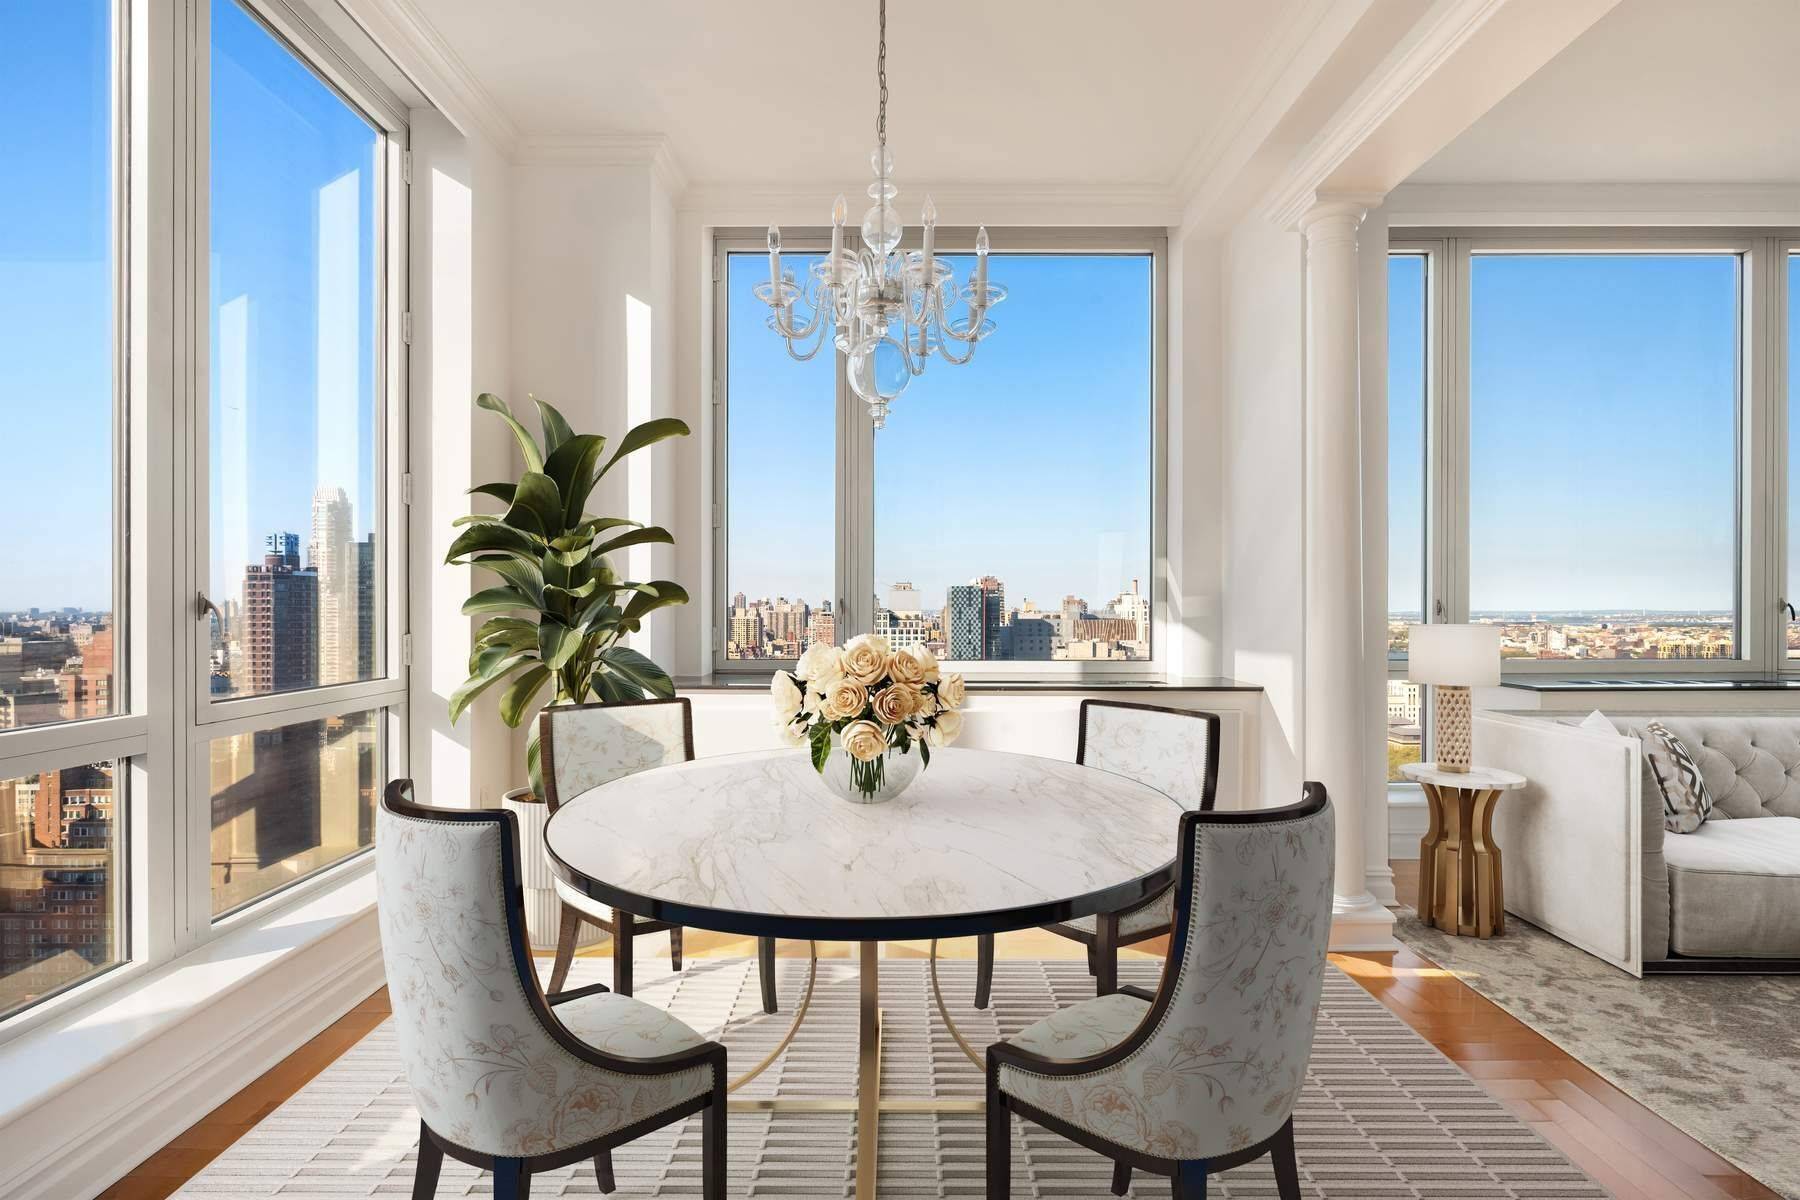 Elegant 3 Bedroom, 3. 5 Bath Corner Residence with Captivating Manhattan Skyline and River Views Experience unparalleled sophistication in this pristine high floor residence, boasting panoramic views of the iconic ...